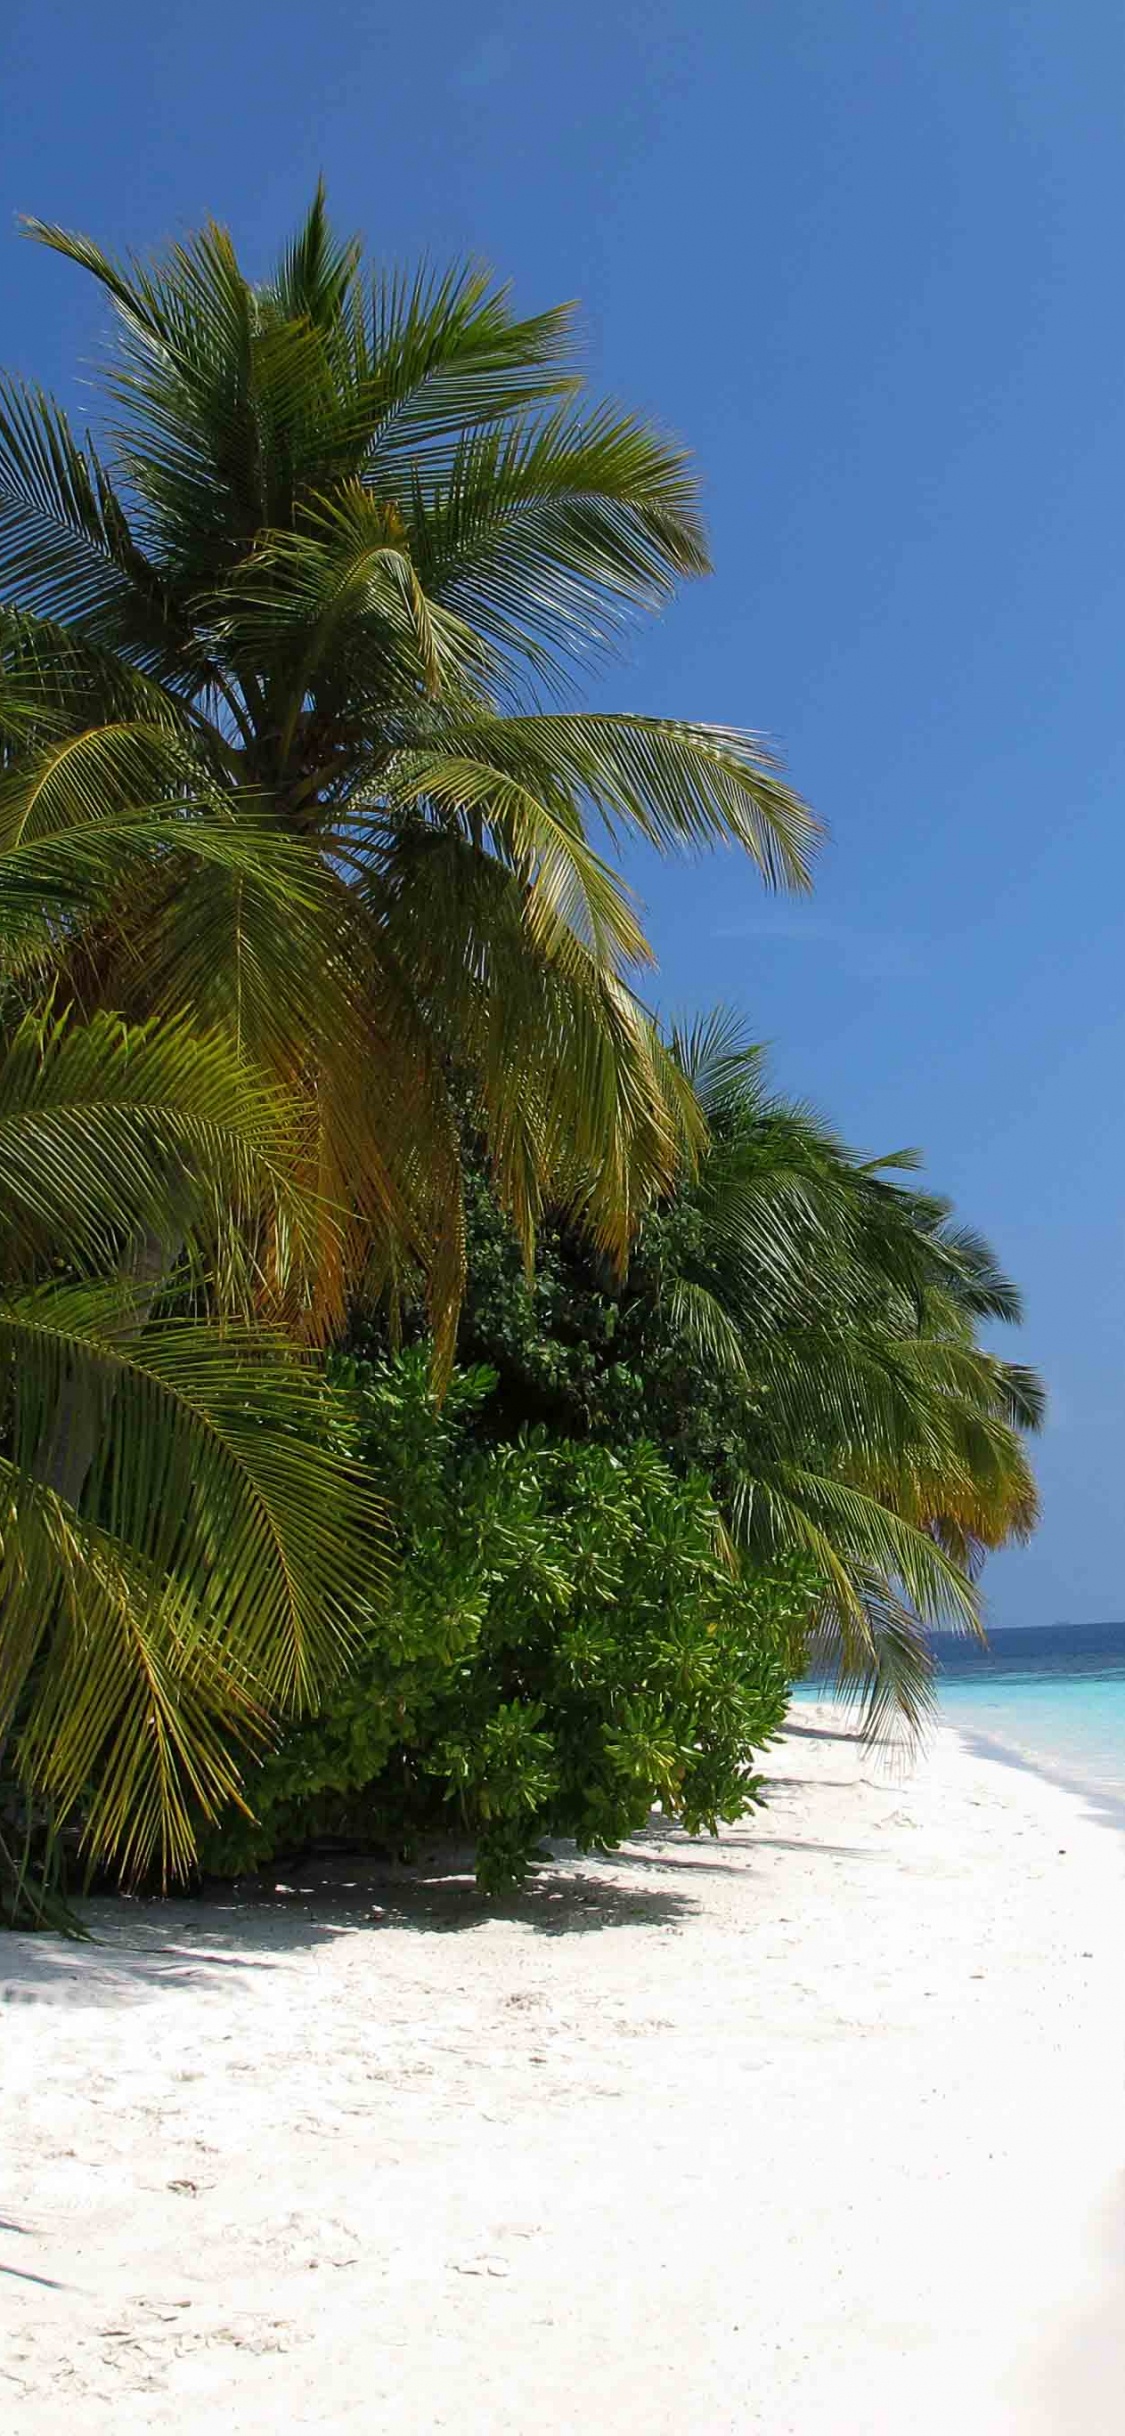 Green Palm Tree on White Sand Beach During Daytime. Wallpaper in 1125x2436 Resolution